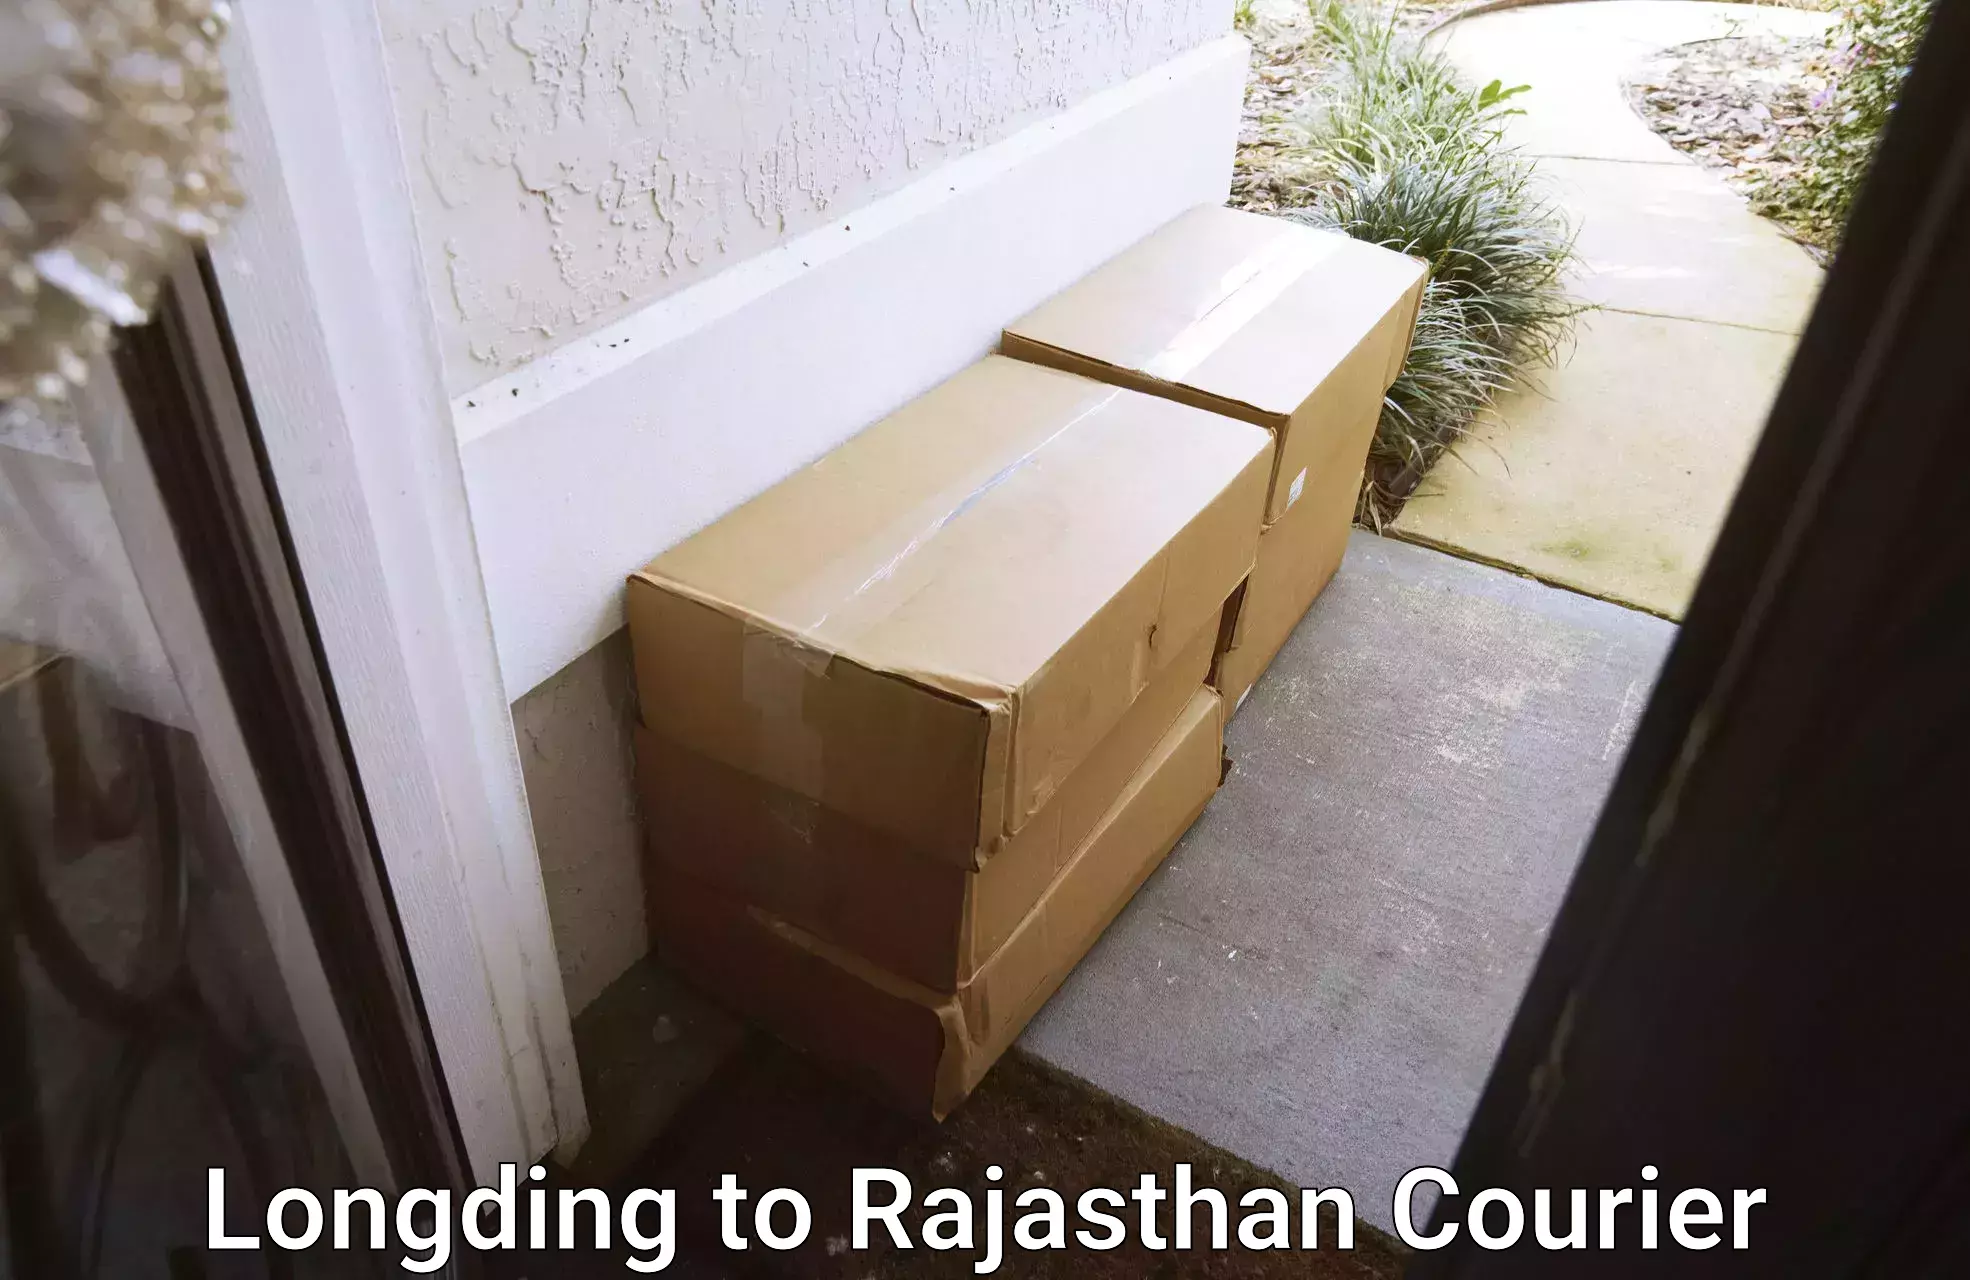 Personal courier services Longding to Rajasthan